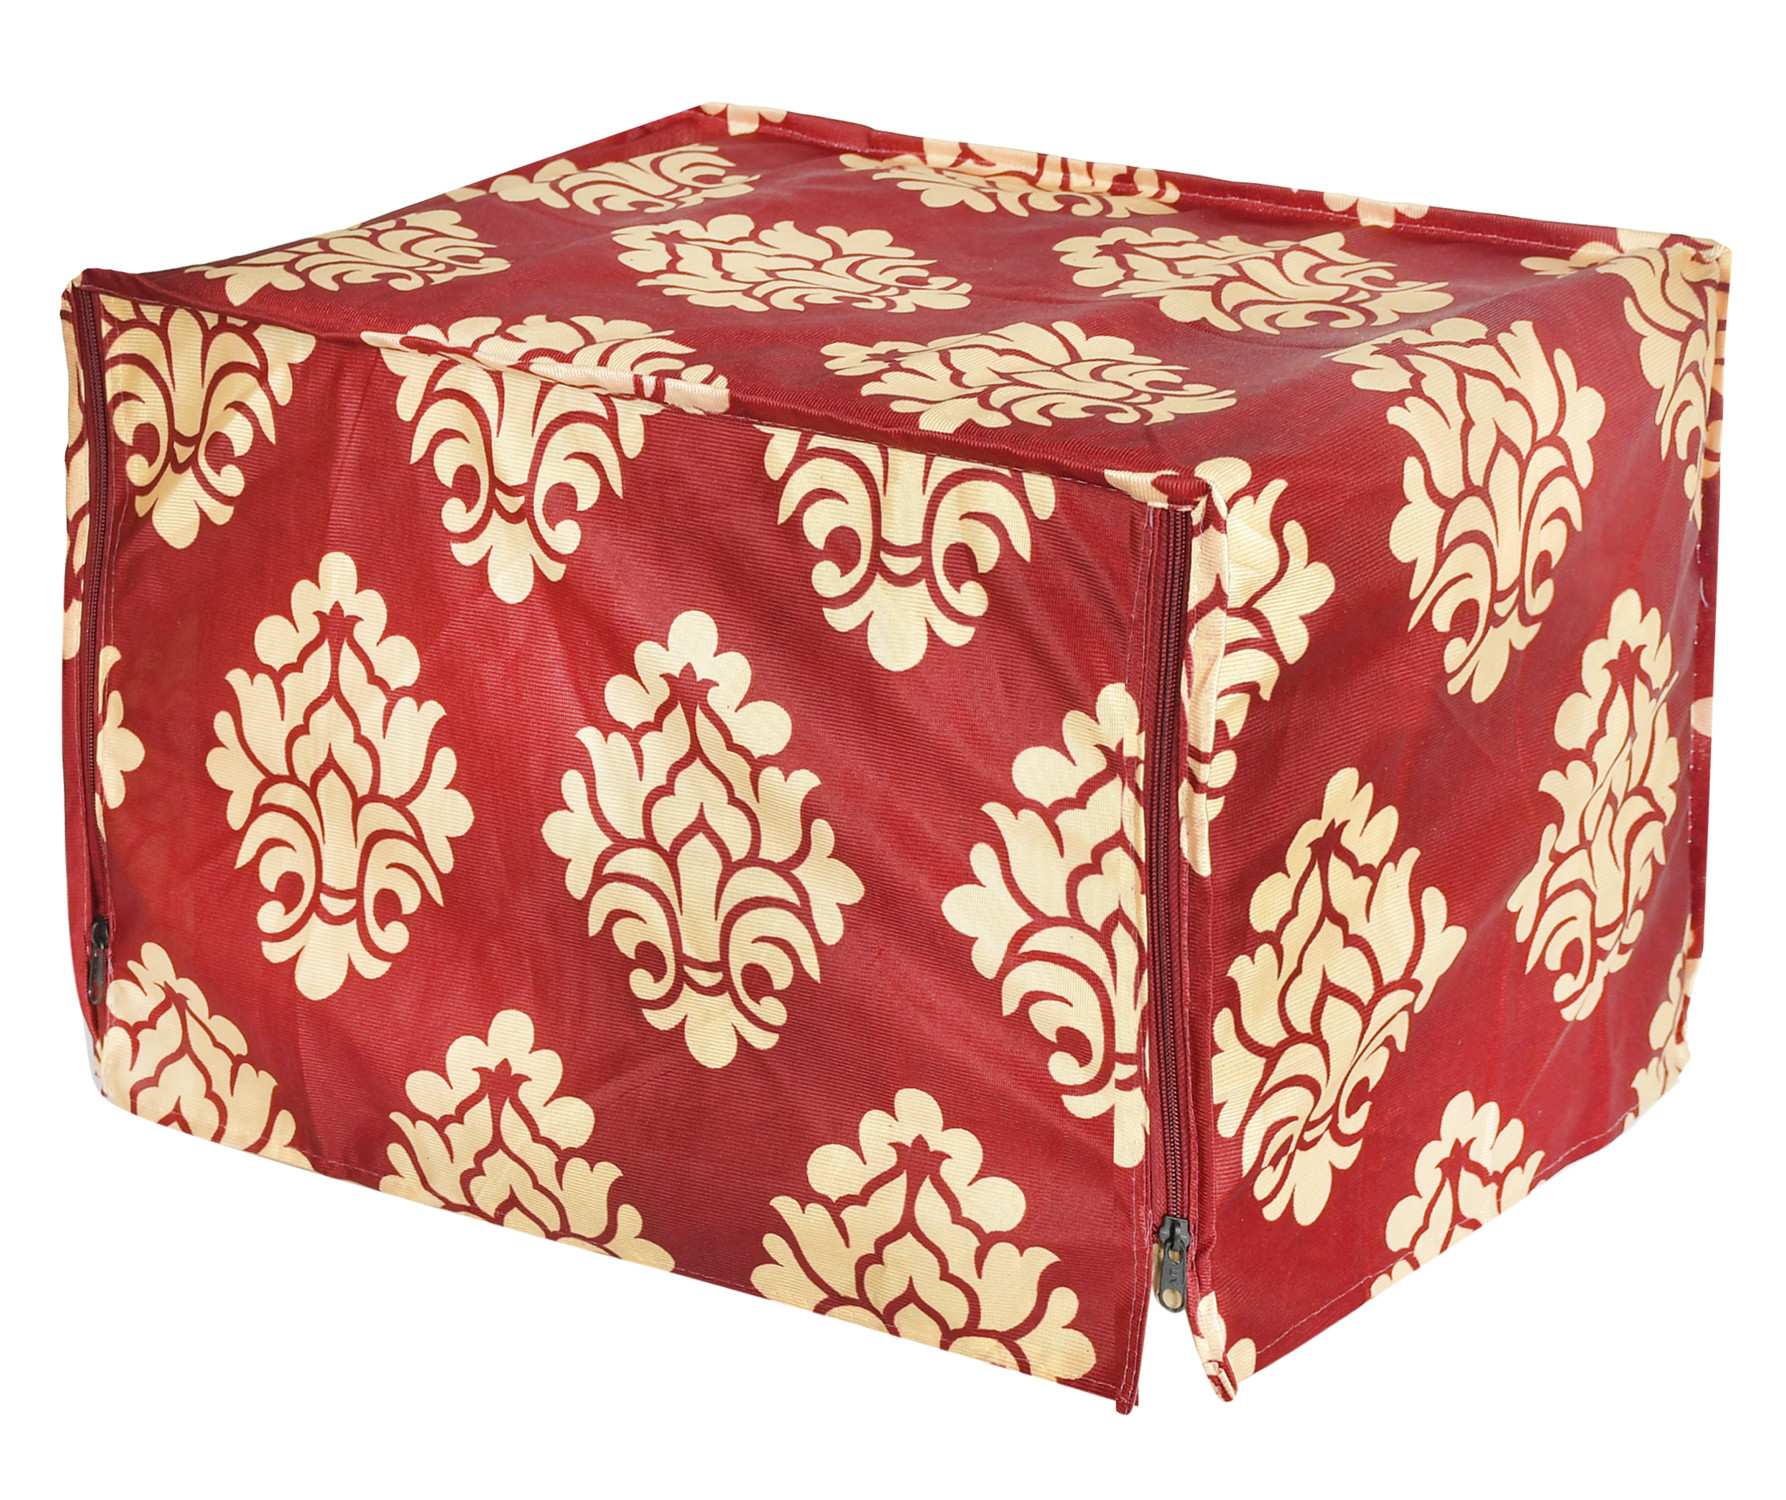 Kuber Industries Polyster Floral Printed Microwave Oven Cover,20 Ltr. (Maroon)-HS43KUBMART25937